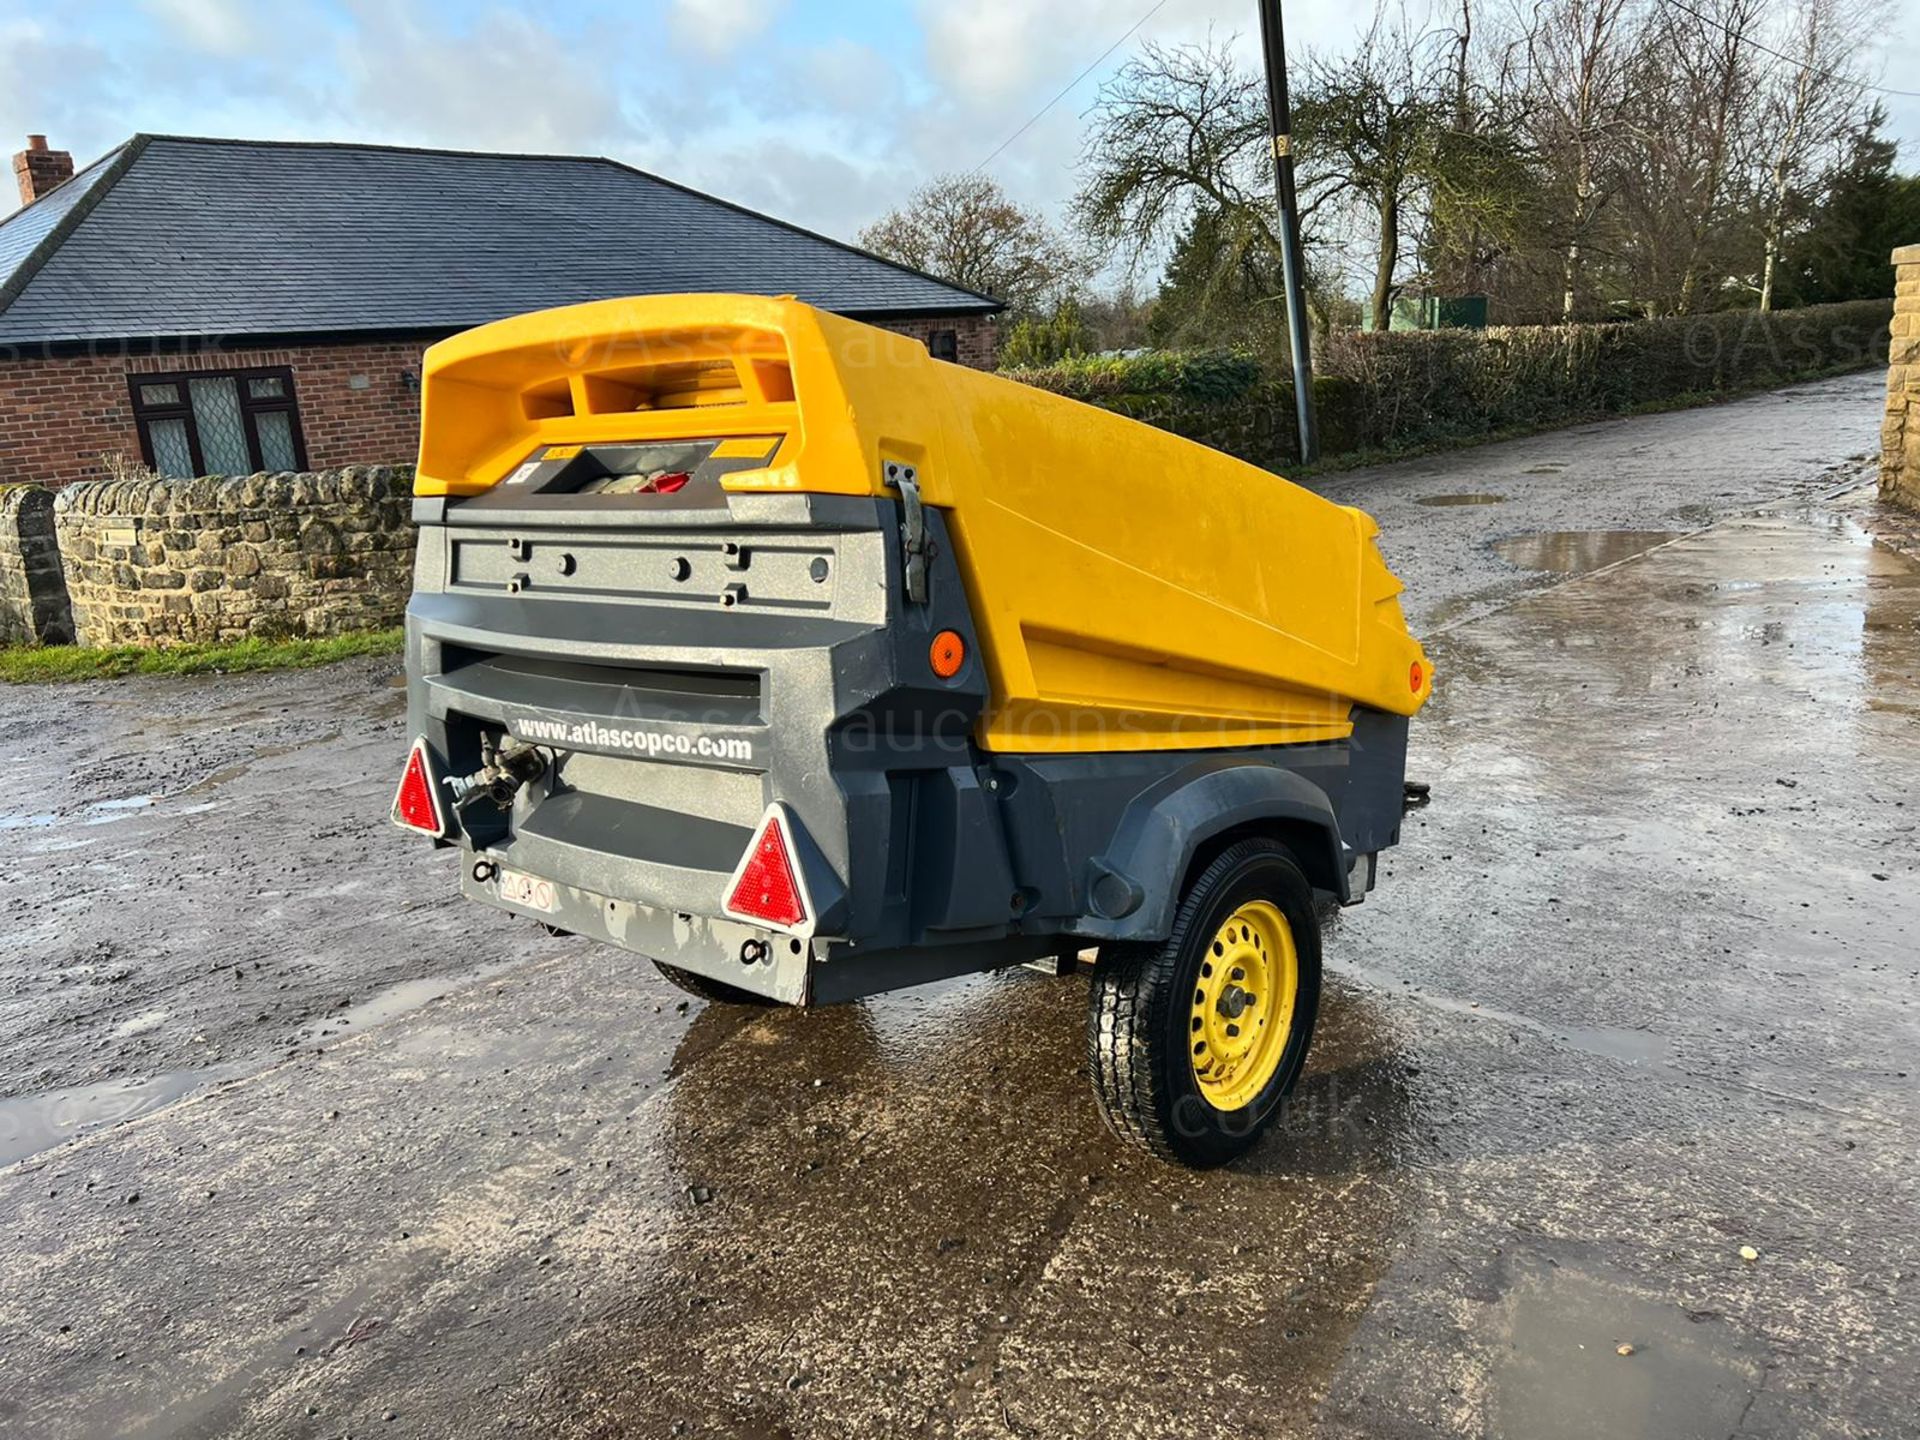 2008 ATLAS COPCO XAS77 DD PE SINGLE AXLE COMPRESSOR, RUNS AND MAKES AIR, SHOWING A LOW 730 HOURS - Image 3 of 15